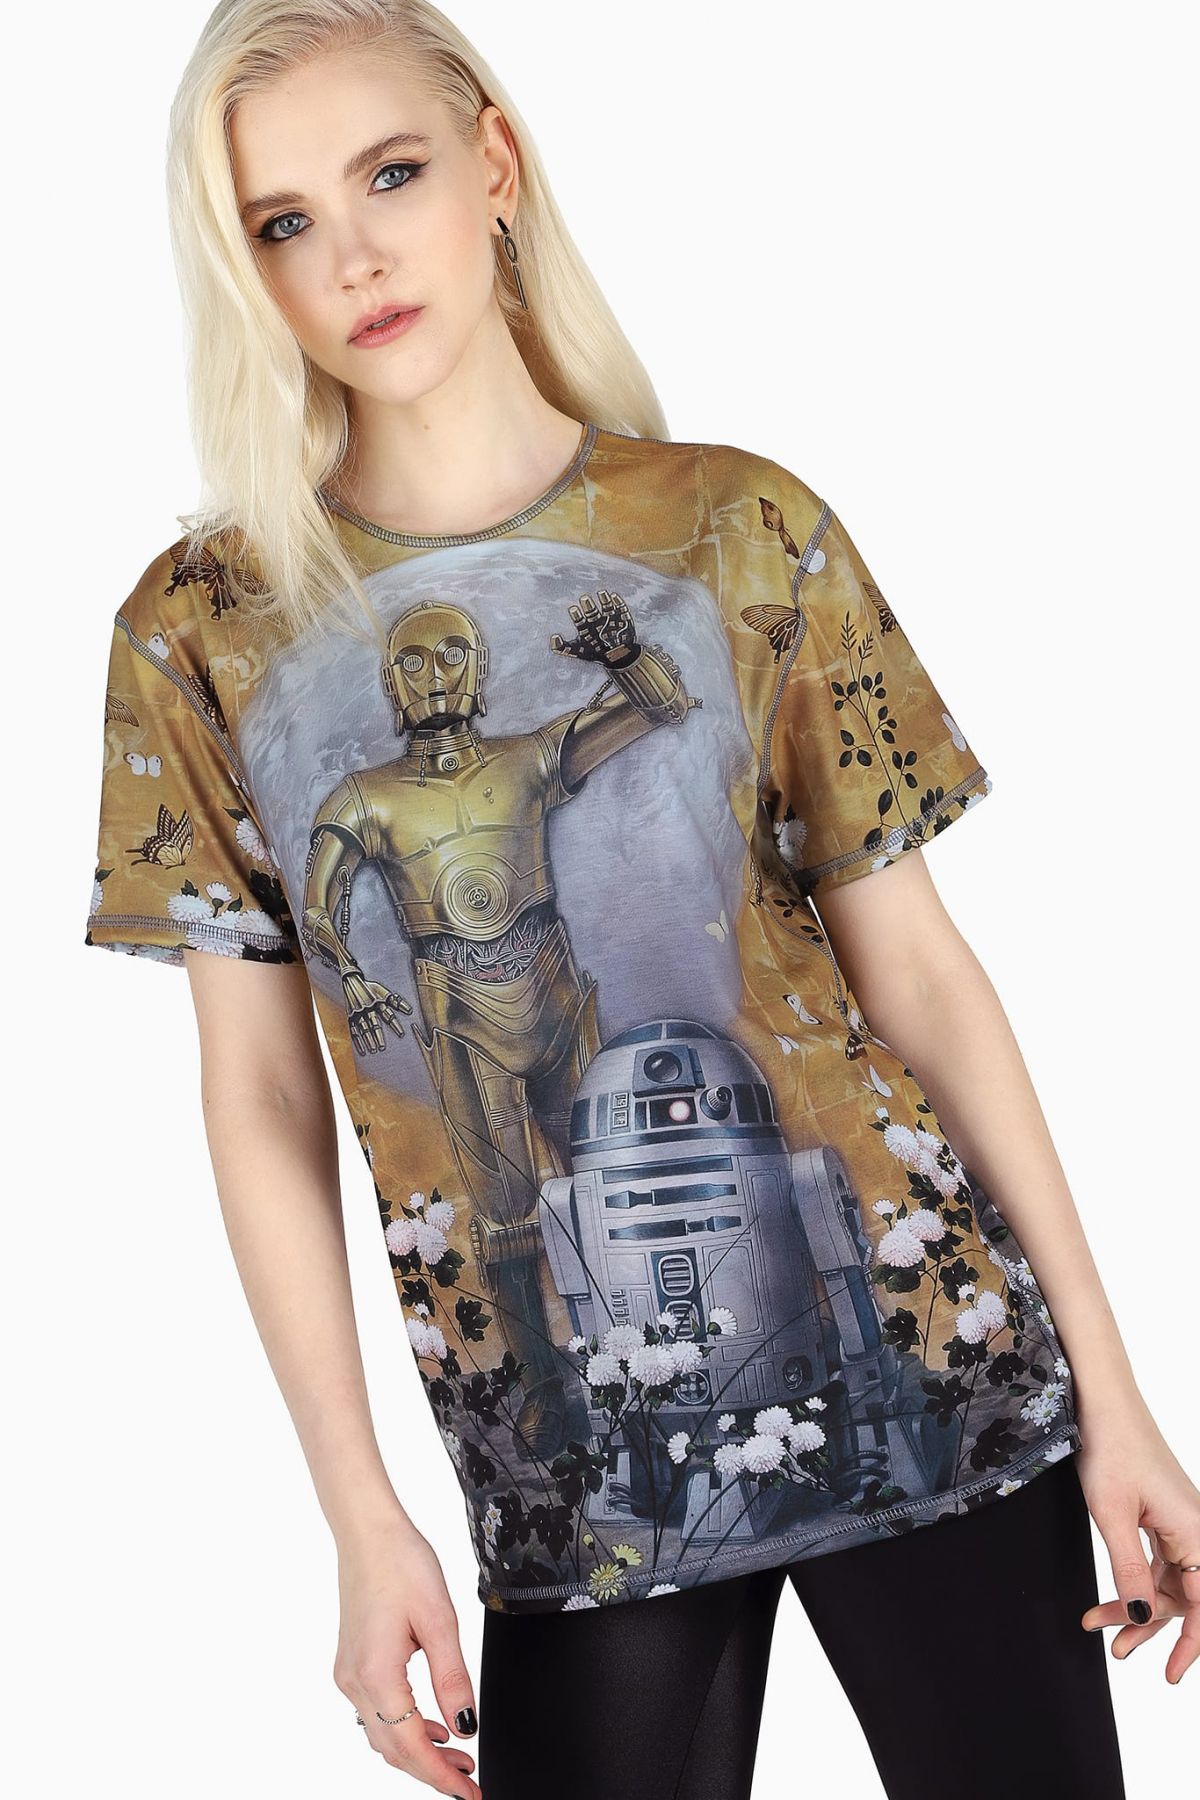 BlackMilk Clothing Star Wars Inside Out Collection